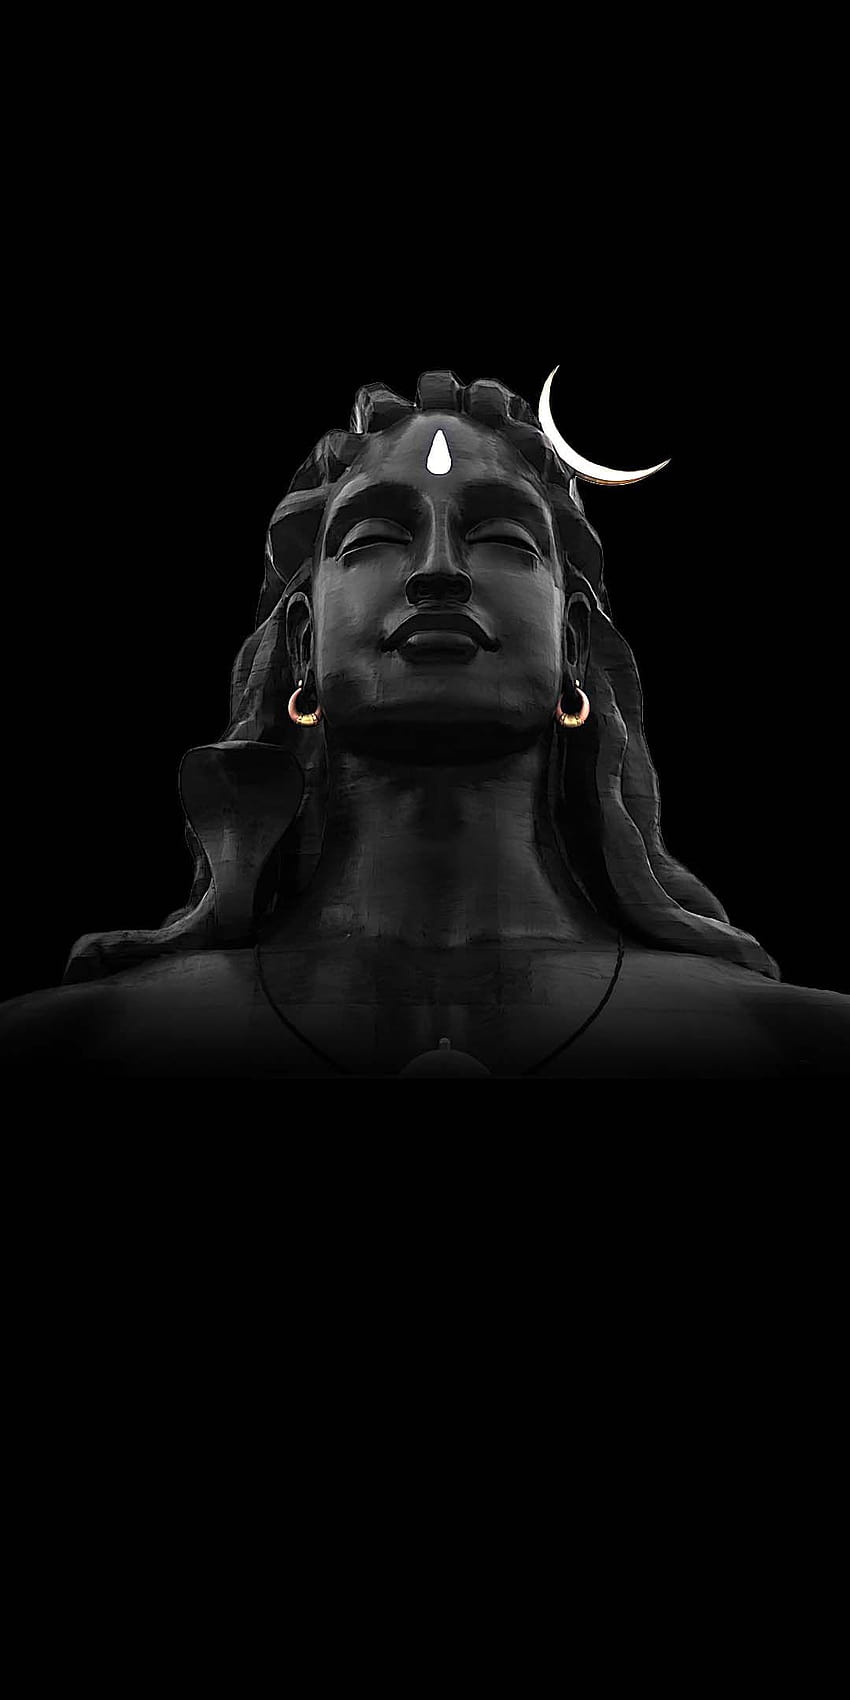 Lord Shiva in 2019, lord shiva angry android HD phone wallpaper ...